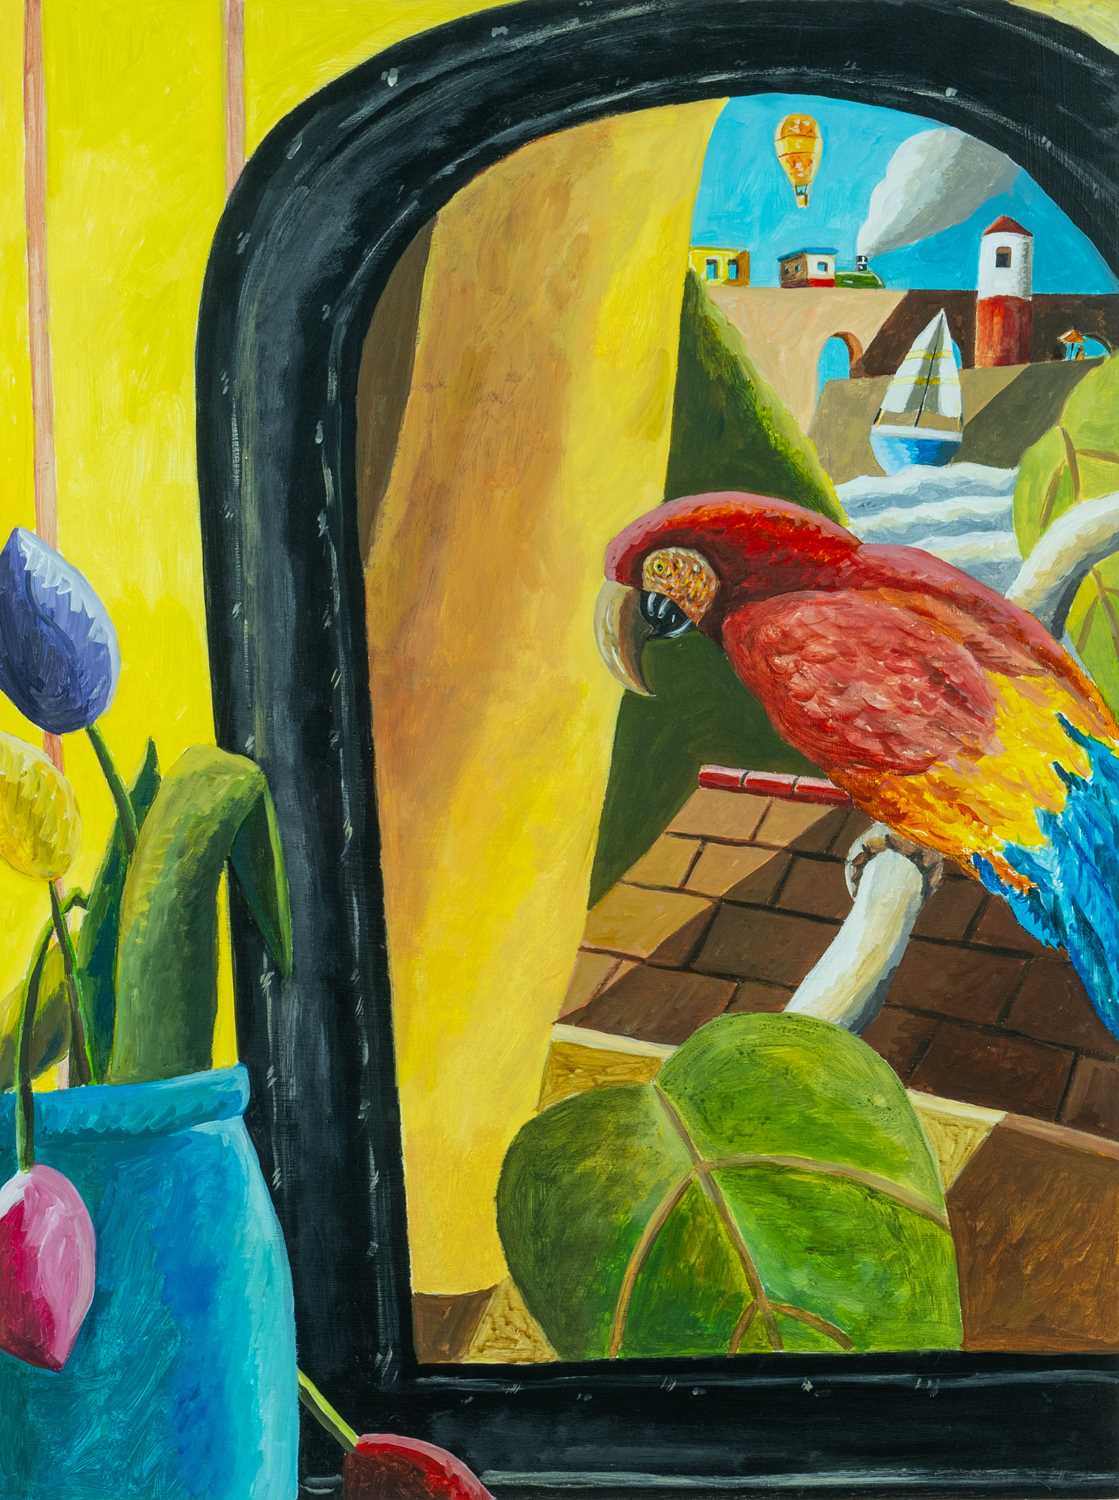 ‡ EMRYS WILLIAMS (Welsh b. 1958) acrylic on panel - entitled verso, 'Parrot and Mirror' on